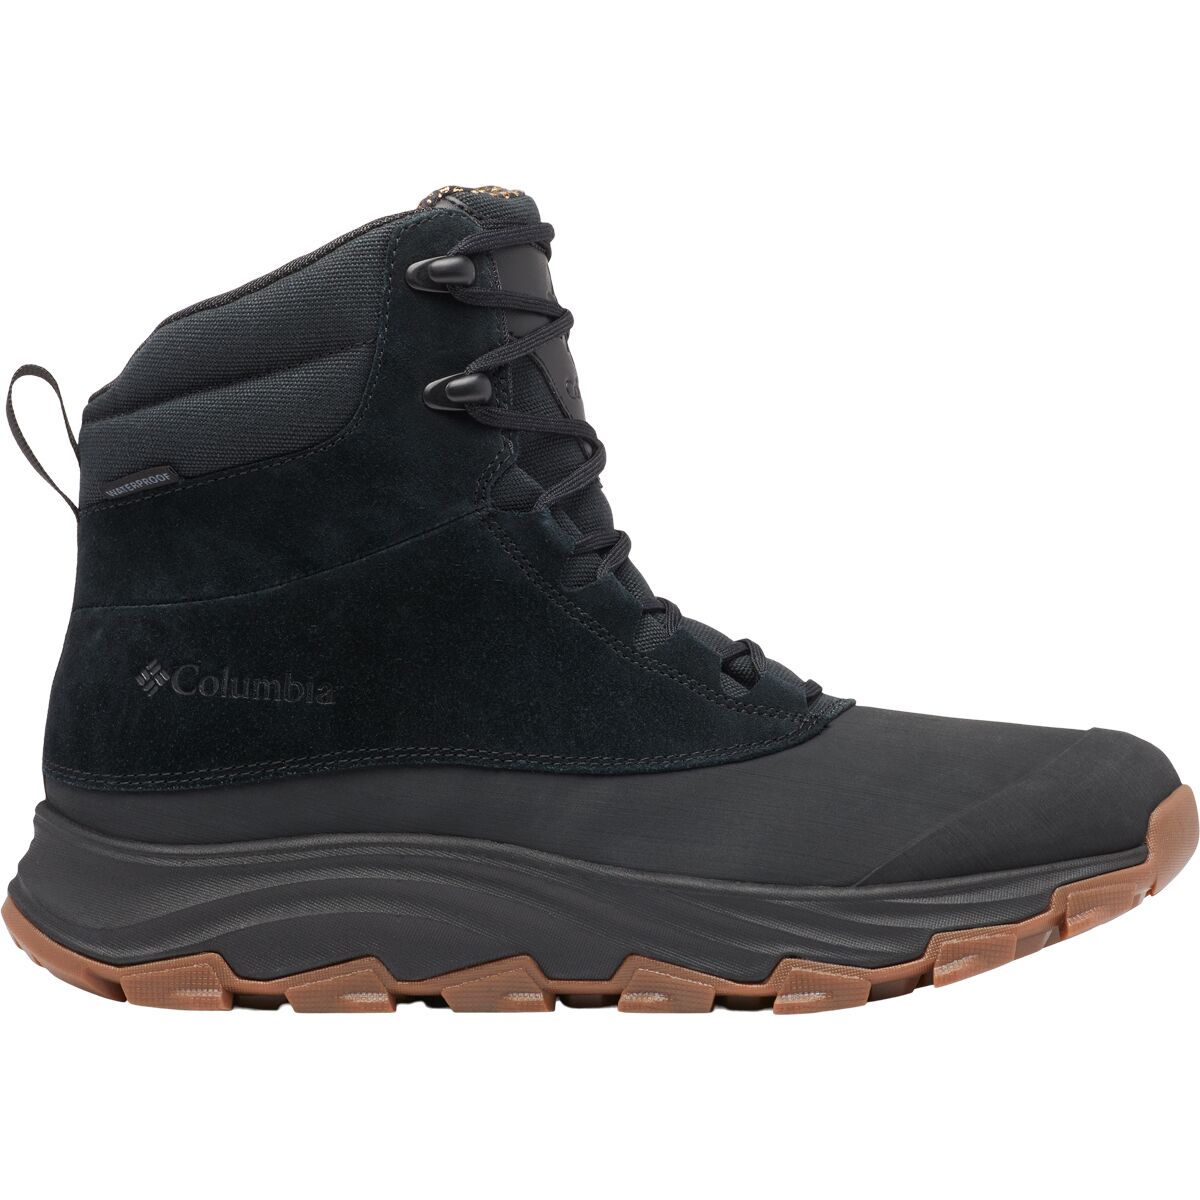 Columbia Expeditionist Shield Boot - Men's